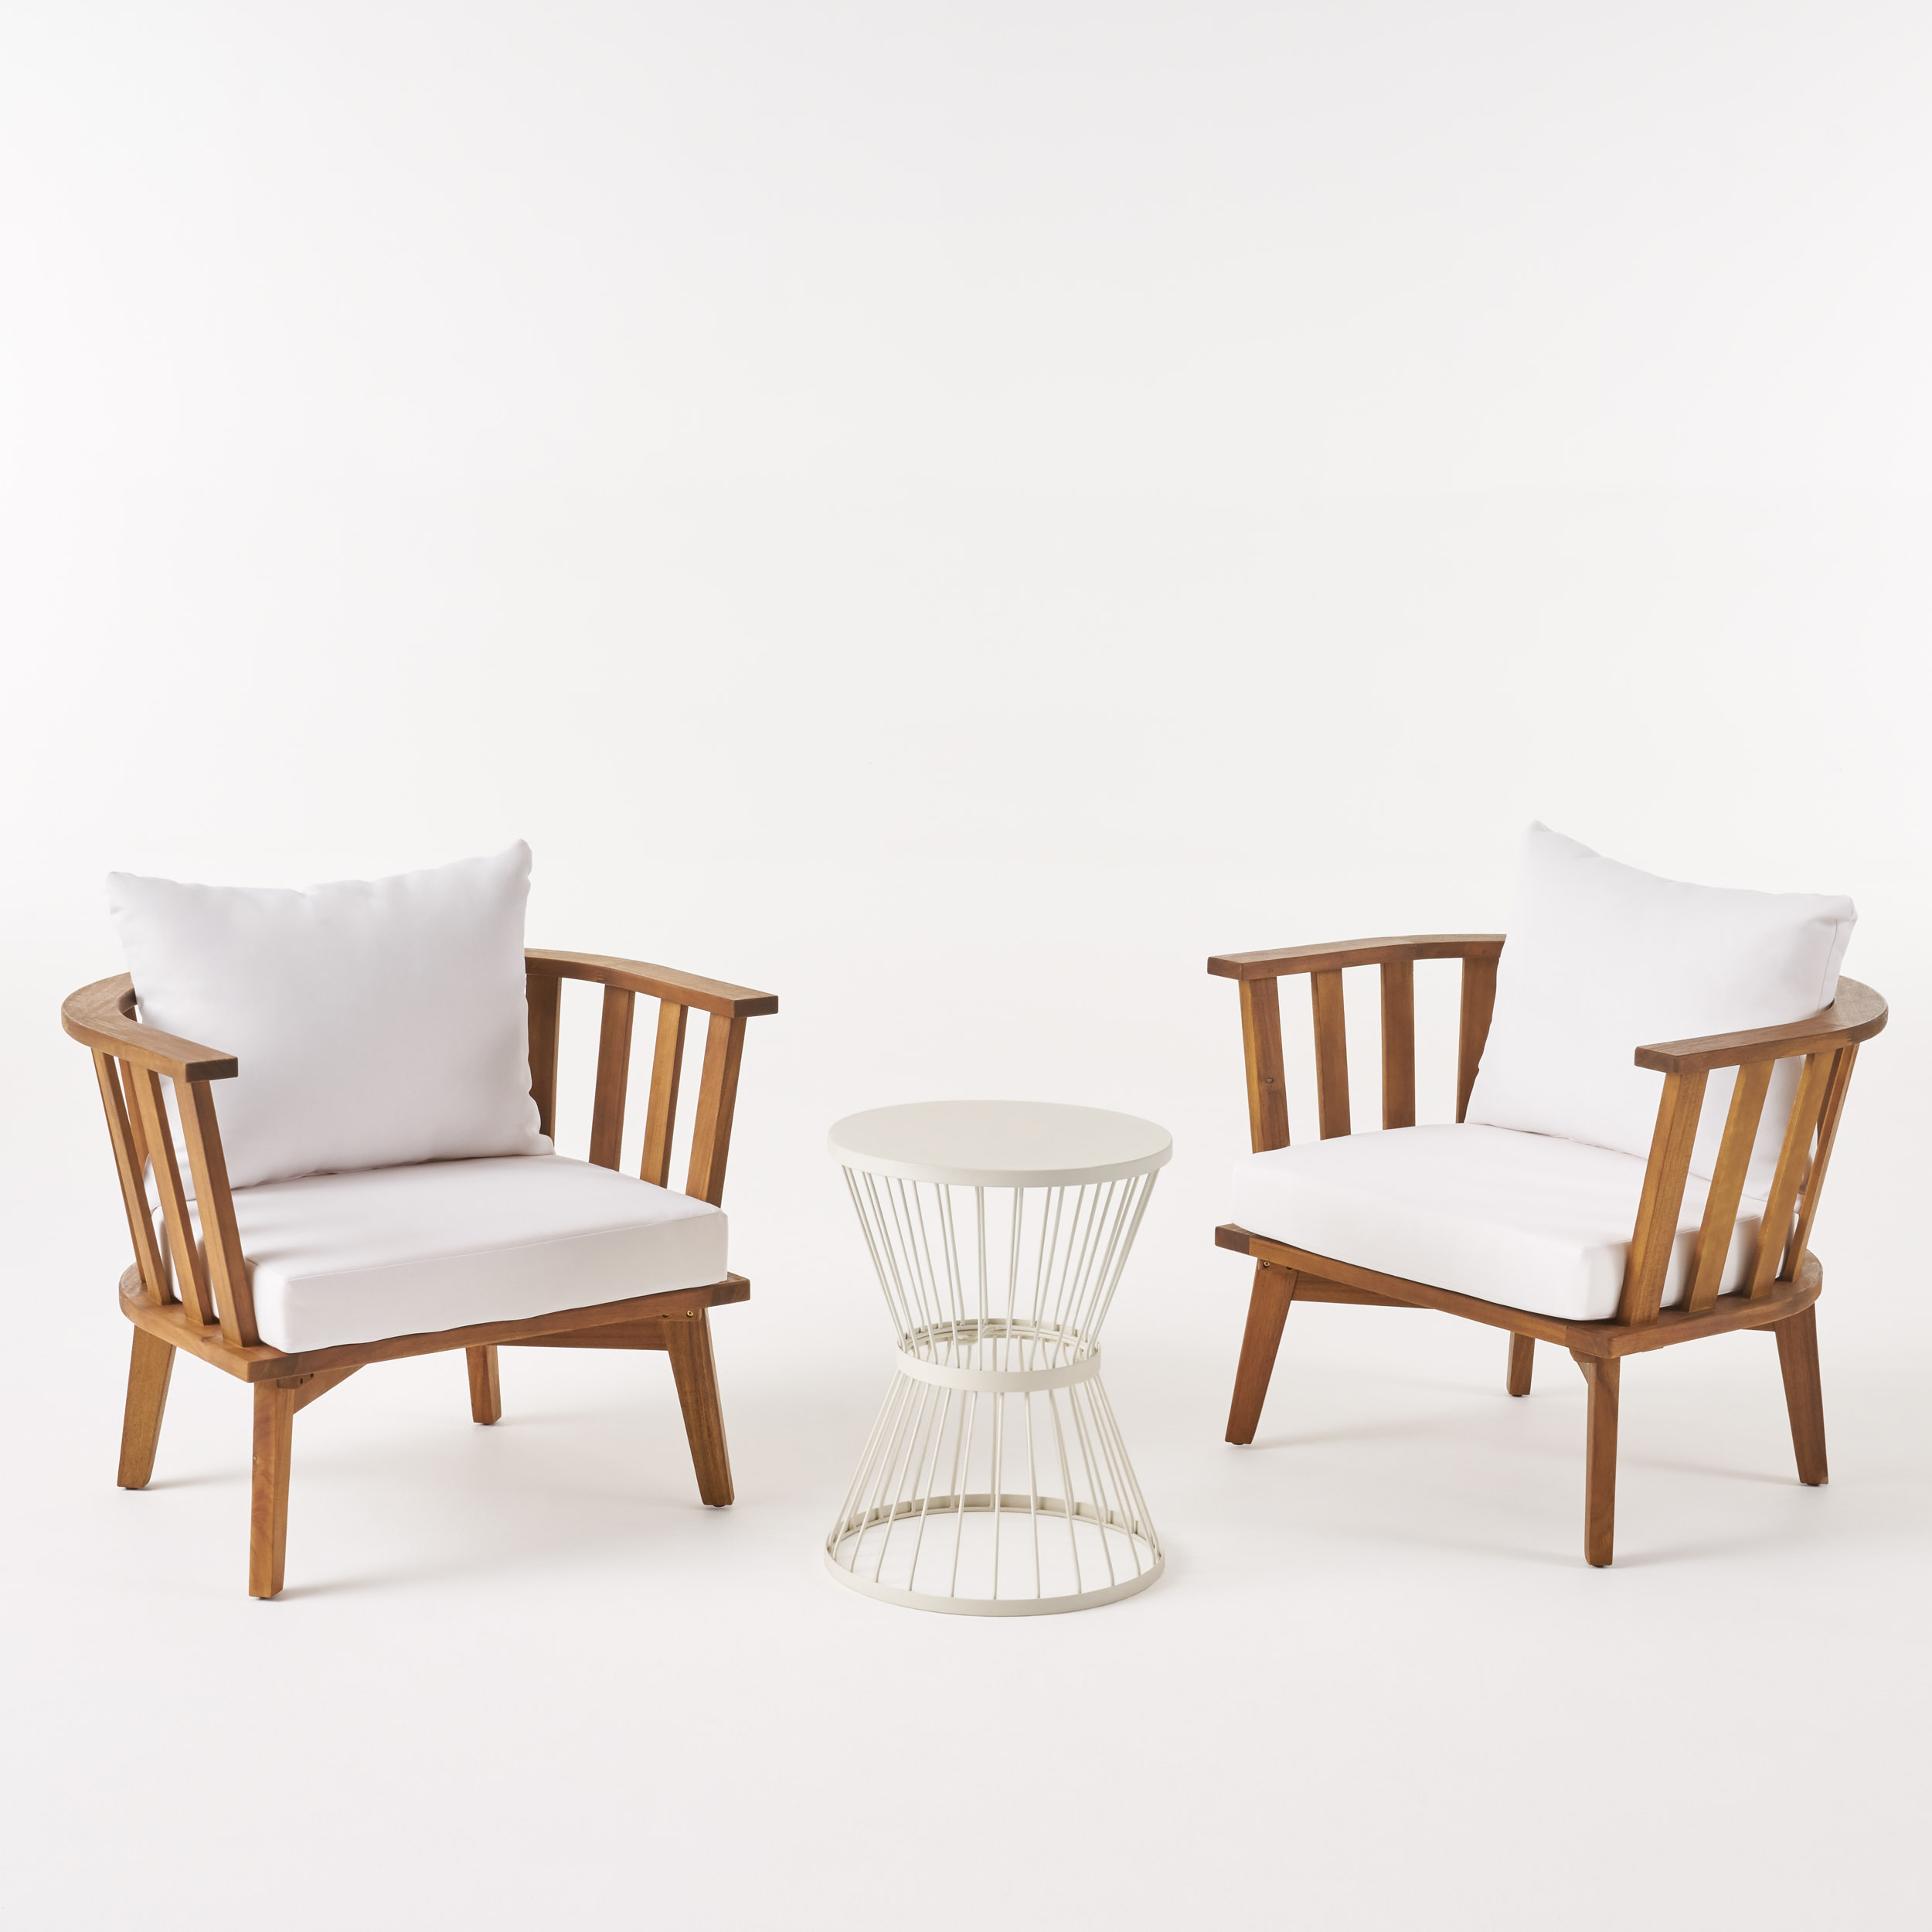 Noble House Phipps 3-Piece Outdoor Wood Conversation Set in Teak and White - image 1 of 6